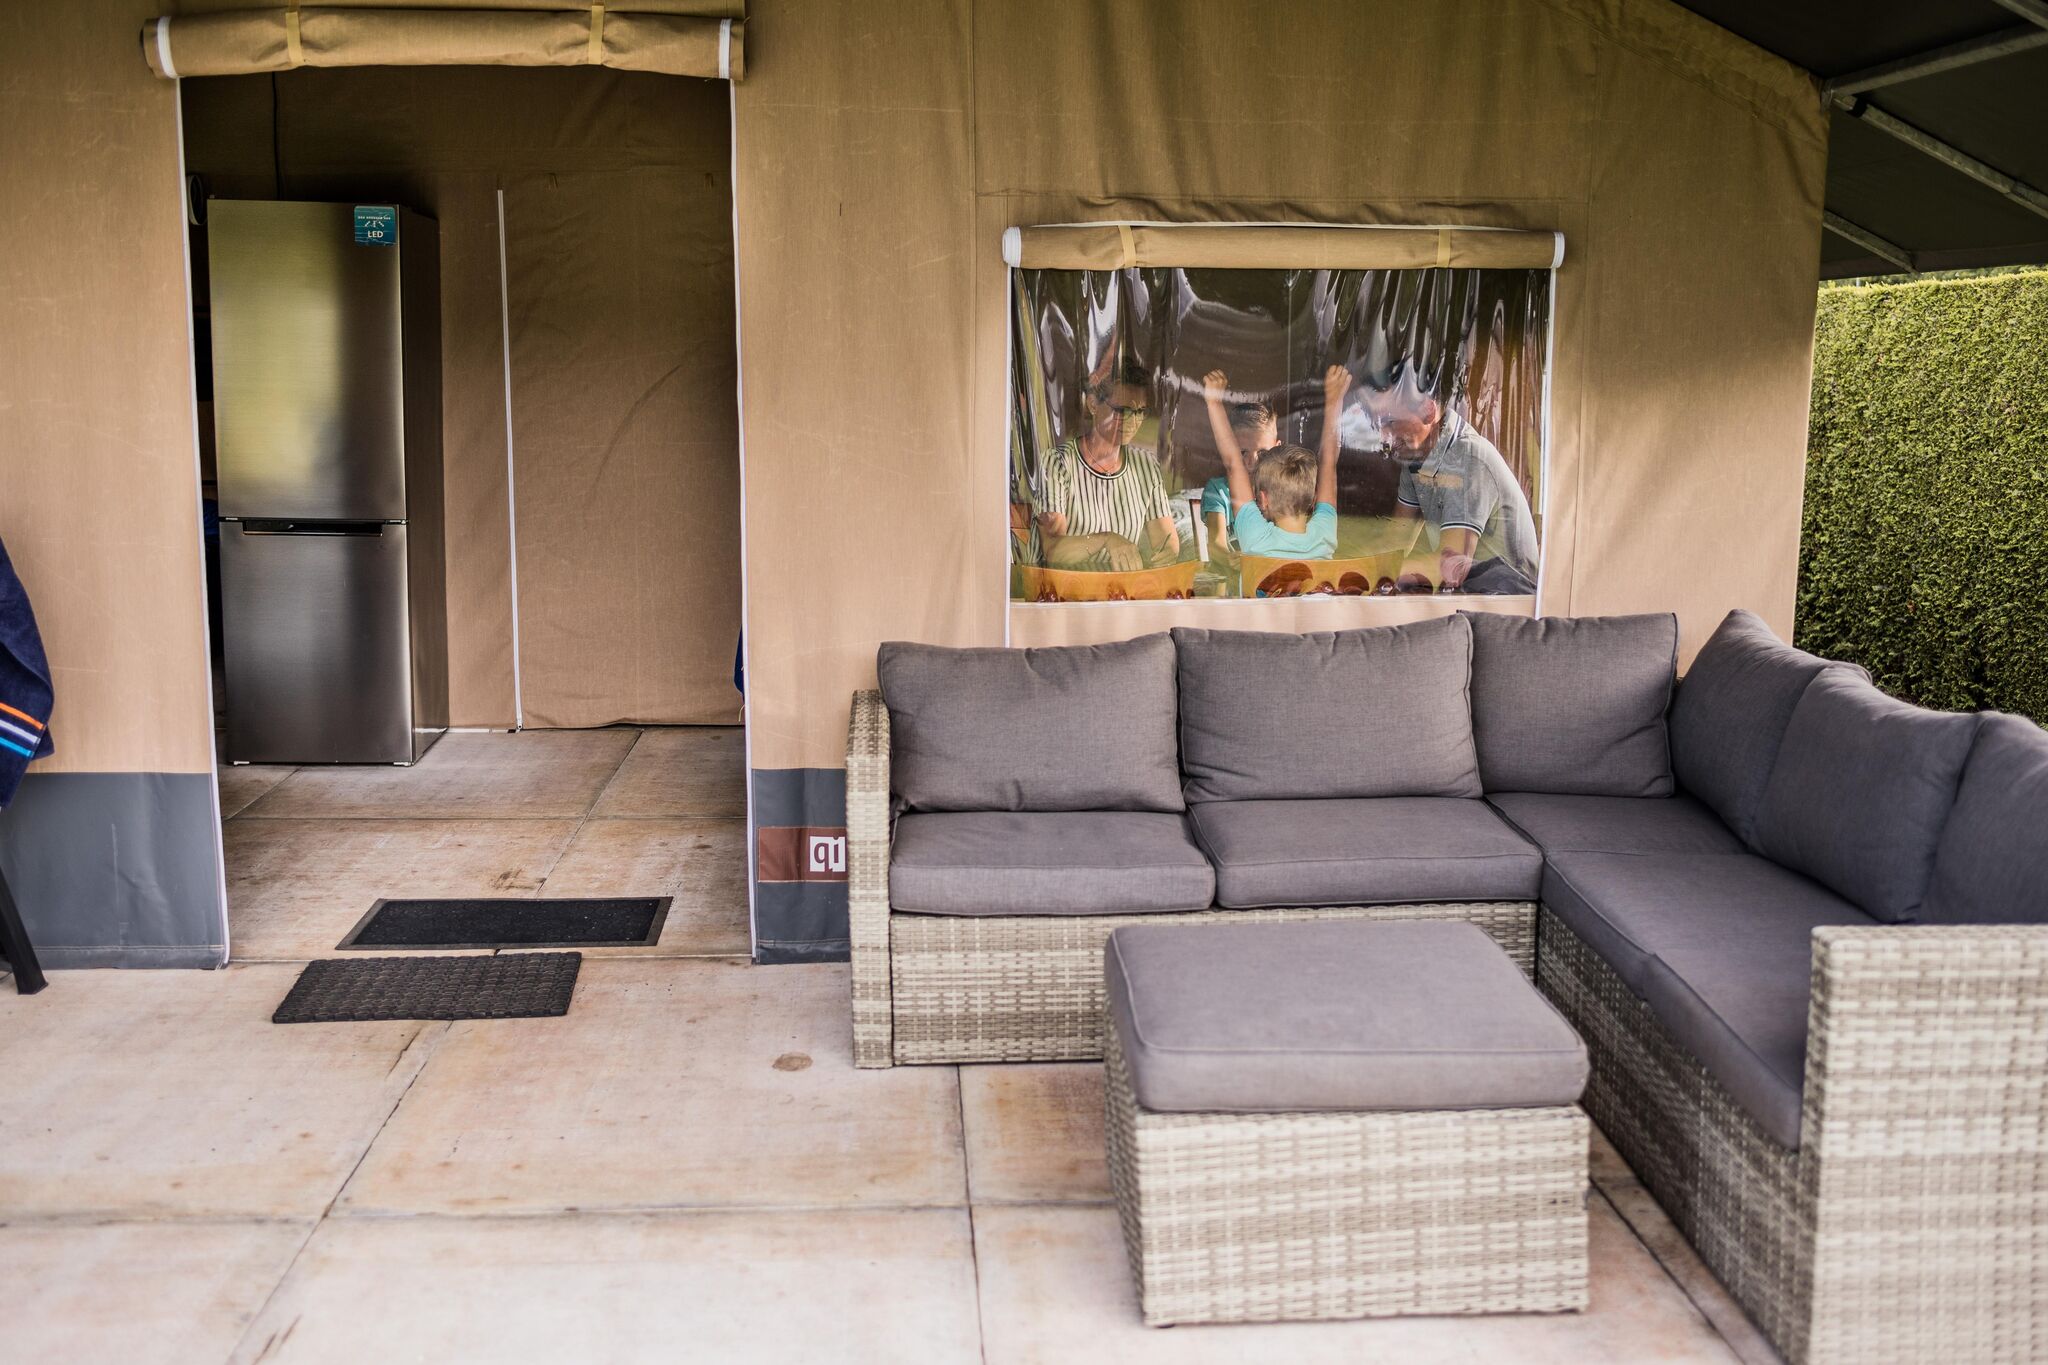 Safari tent with its own sanitary facilities